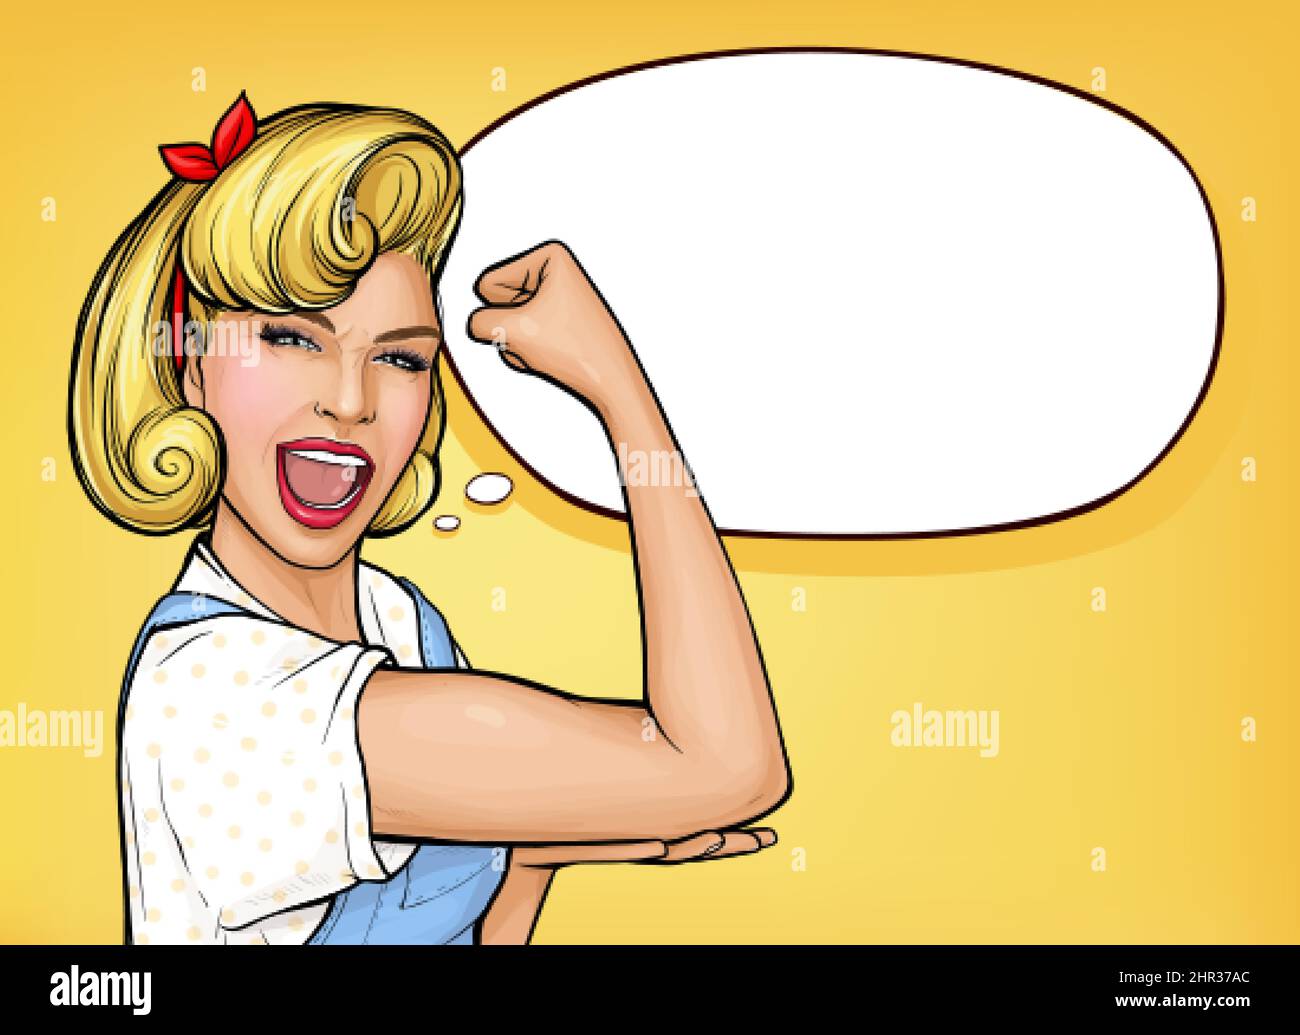 Women Power. Pop art sexy strong blonde girl in a circle on white  background. Classical american symbol of female power, woman rights,  protest, feminism. Vector illustration in retro comic style. Stock Vector